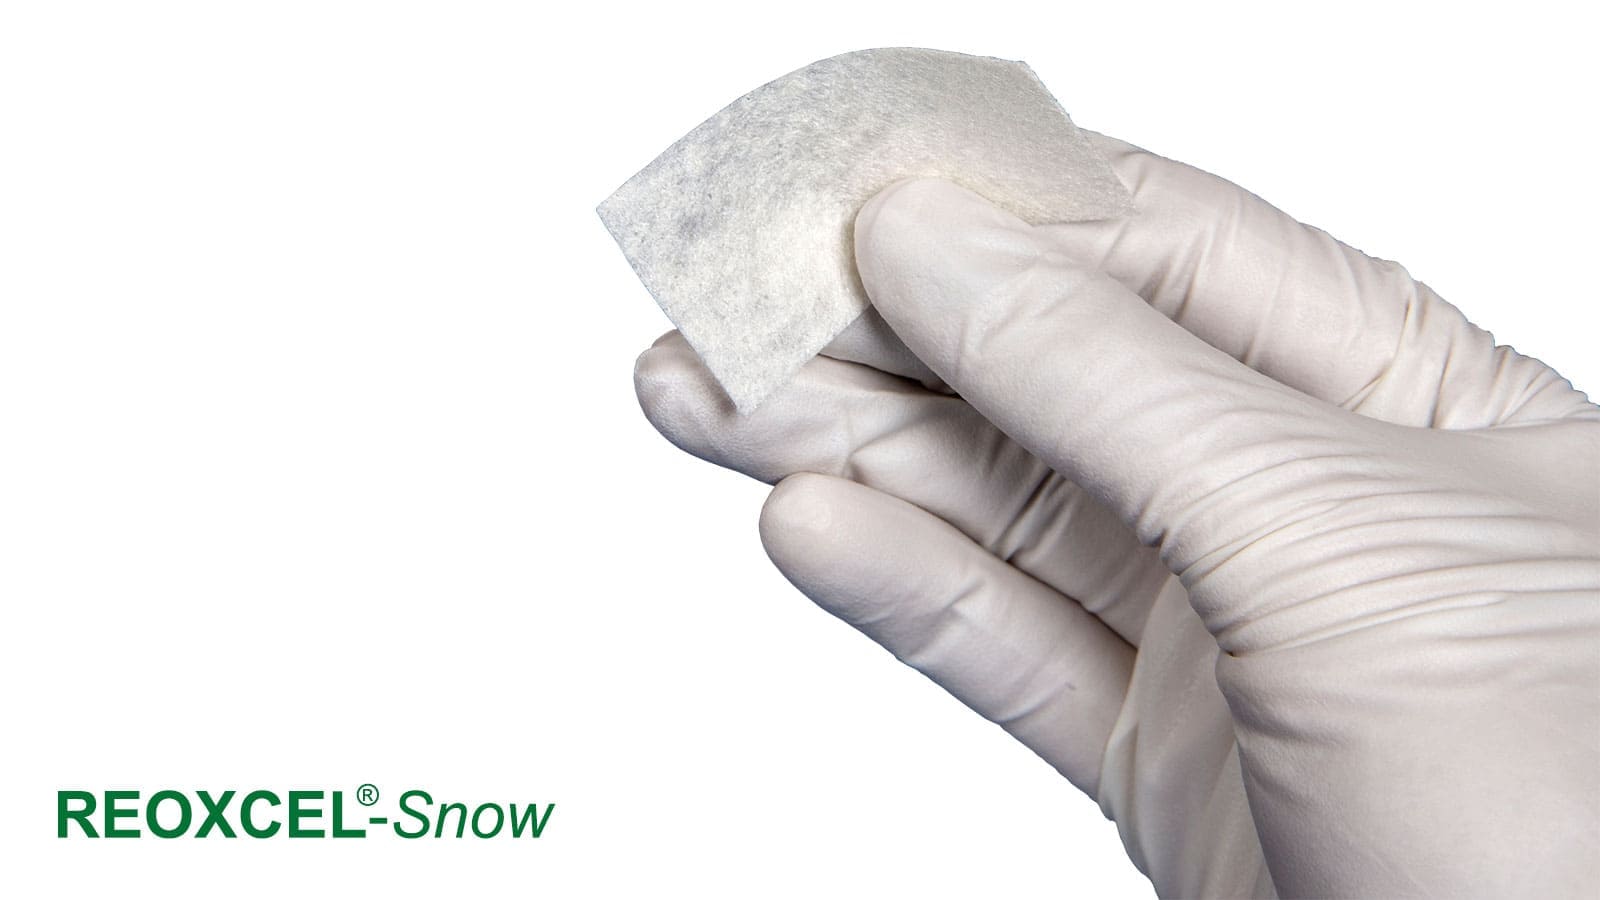 Single-Layer and About Fibrous Cellulose-Based Reoxcel Snow Haemostats